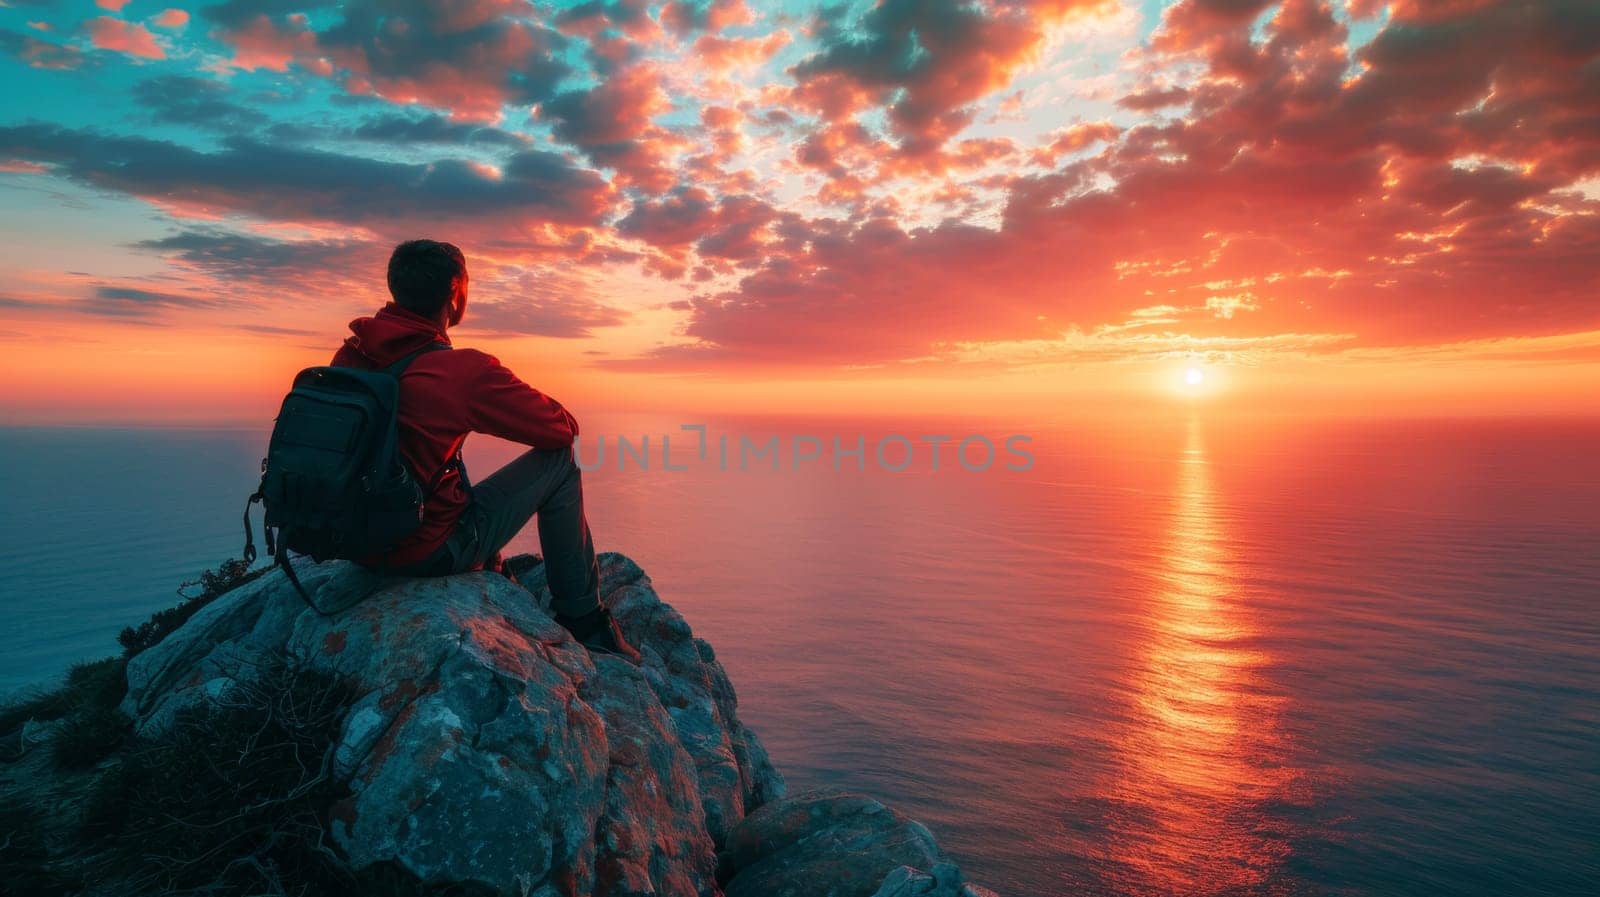 A man sitting on a rock overlooking the ocean at sunset